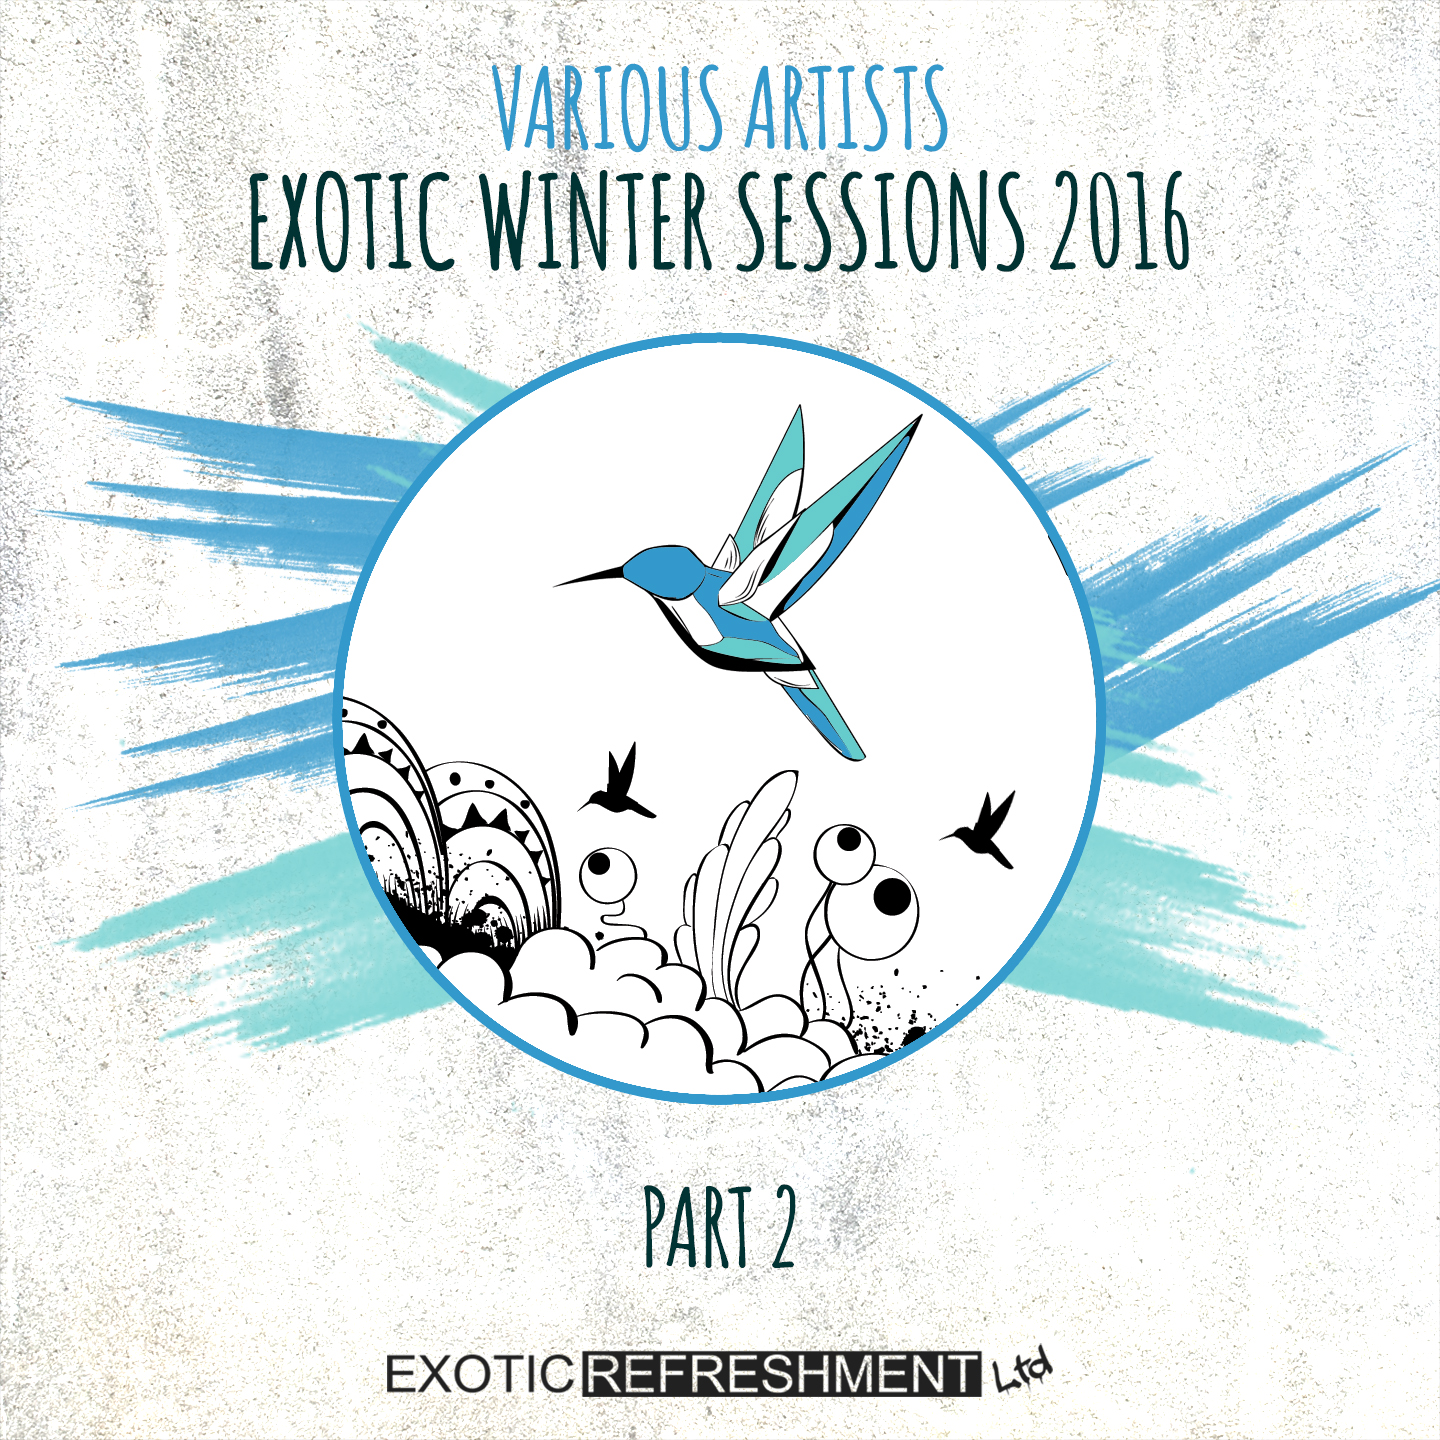 Exotic Winter Sessions 2016 - Part 2